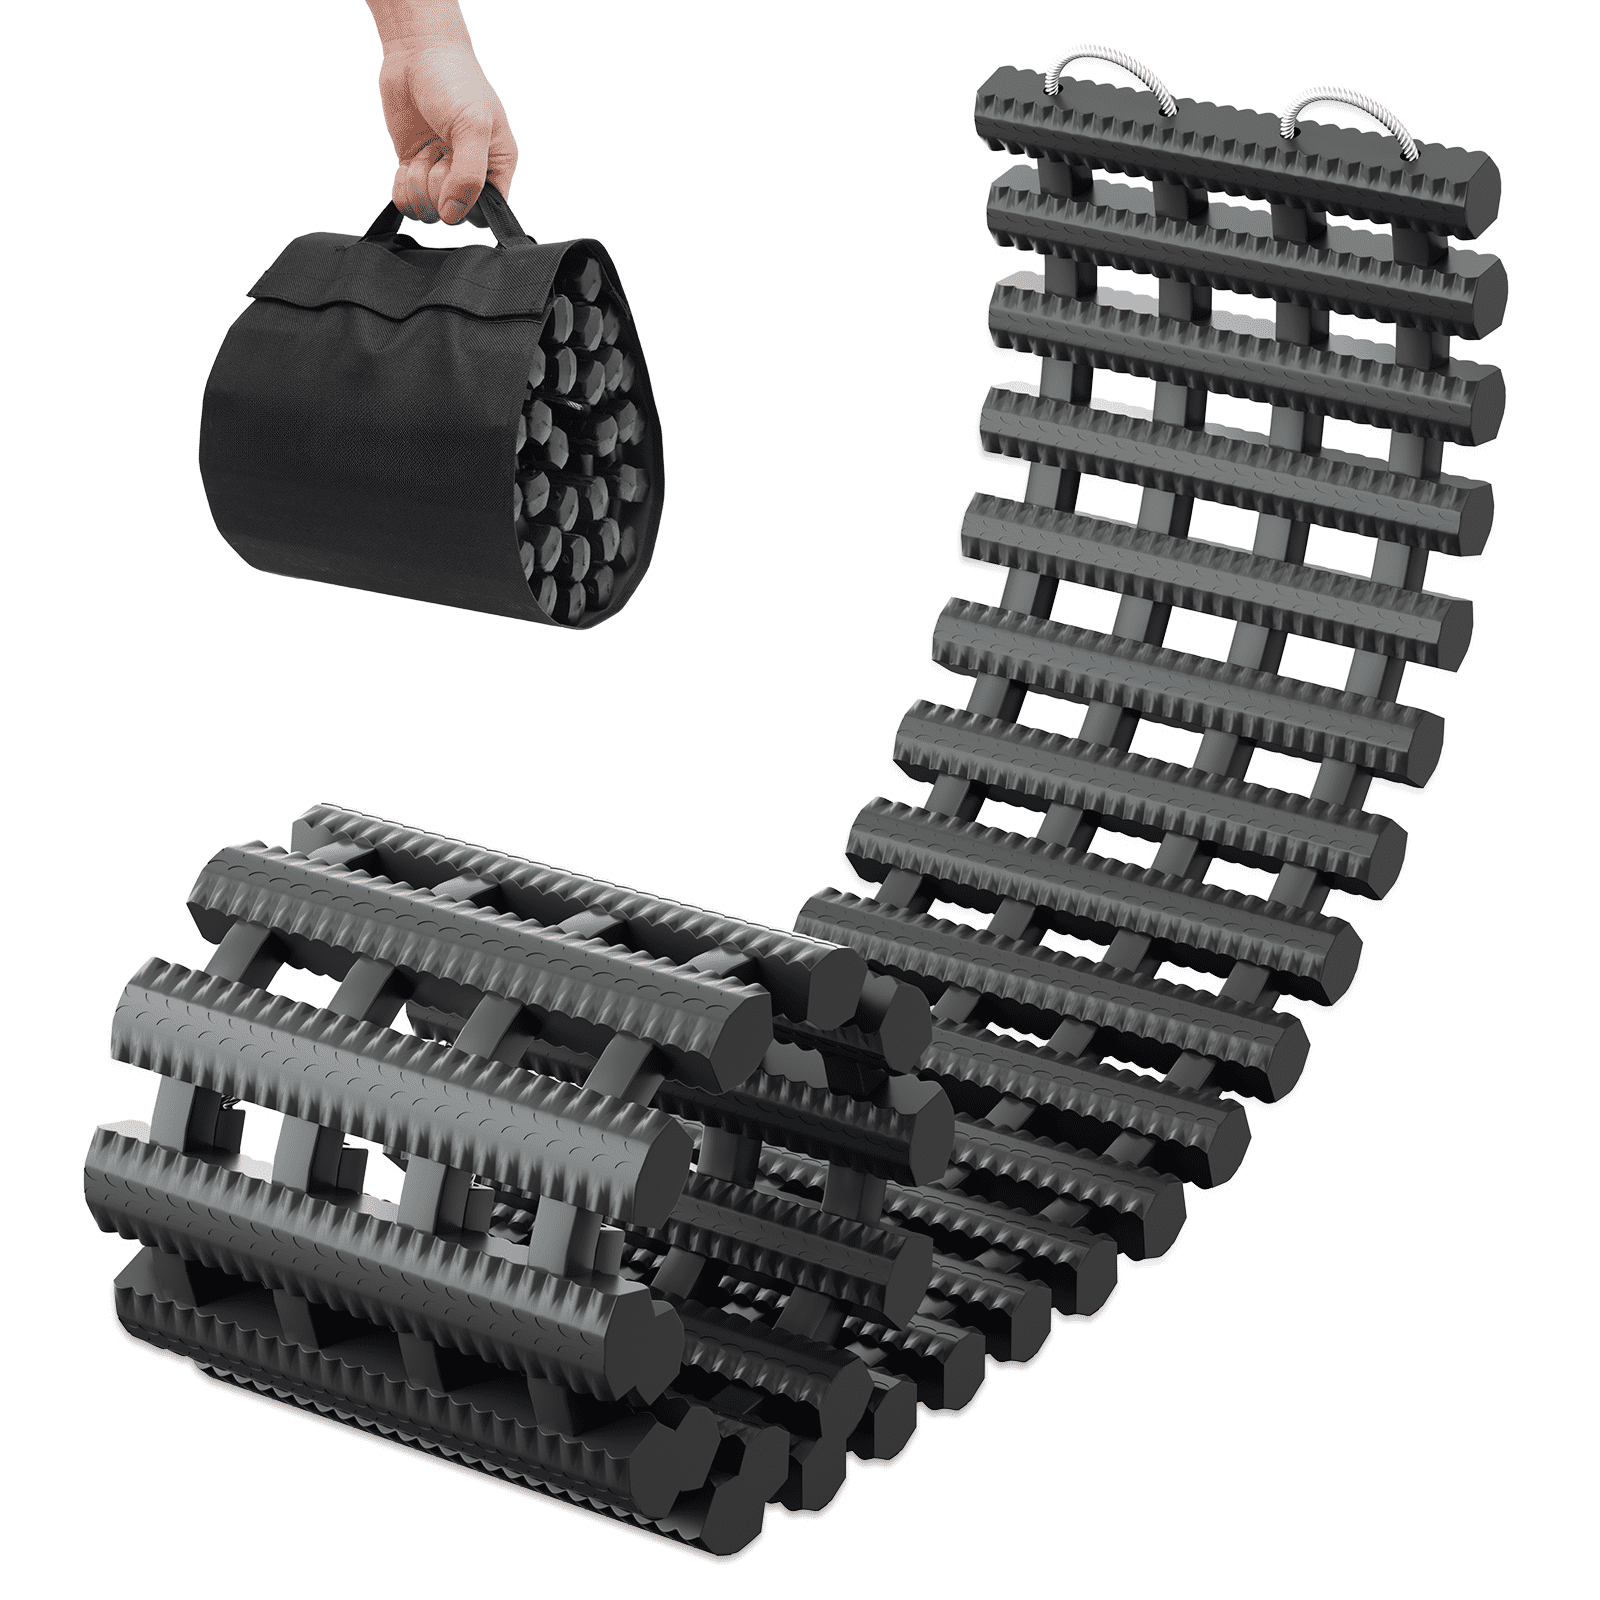 Costway 2 Pcs Recovery Traction Tracks Mat Mud Sand Snow Tier Ladder Off  Road 